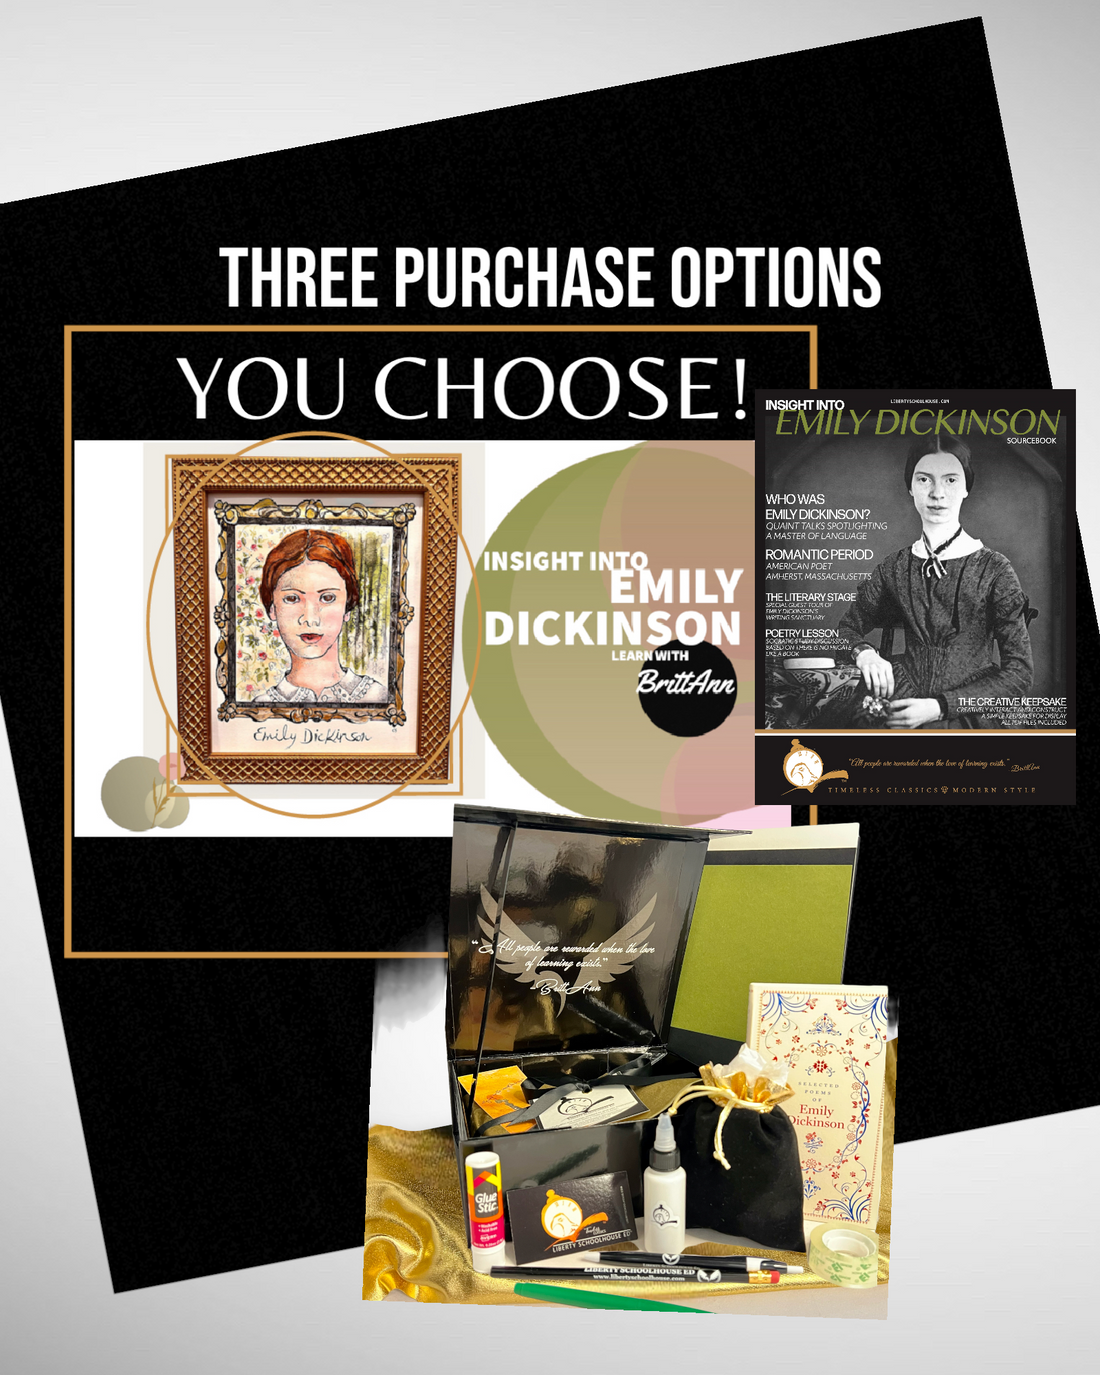 INSIGHT INTO EMILY DICKINSON COURSE OPTIONS